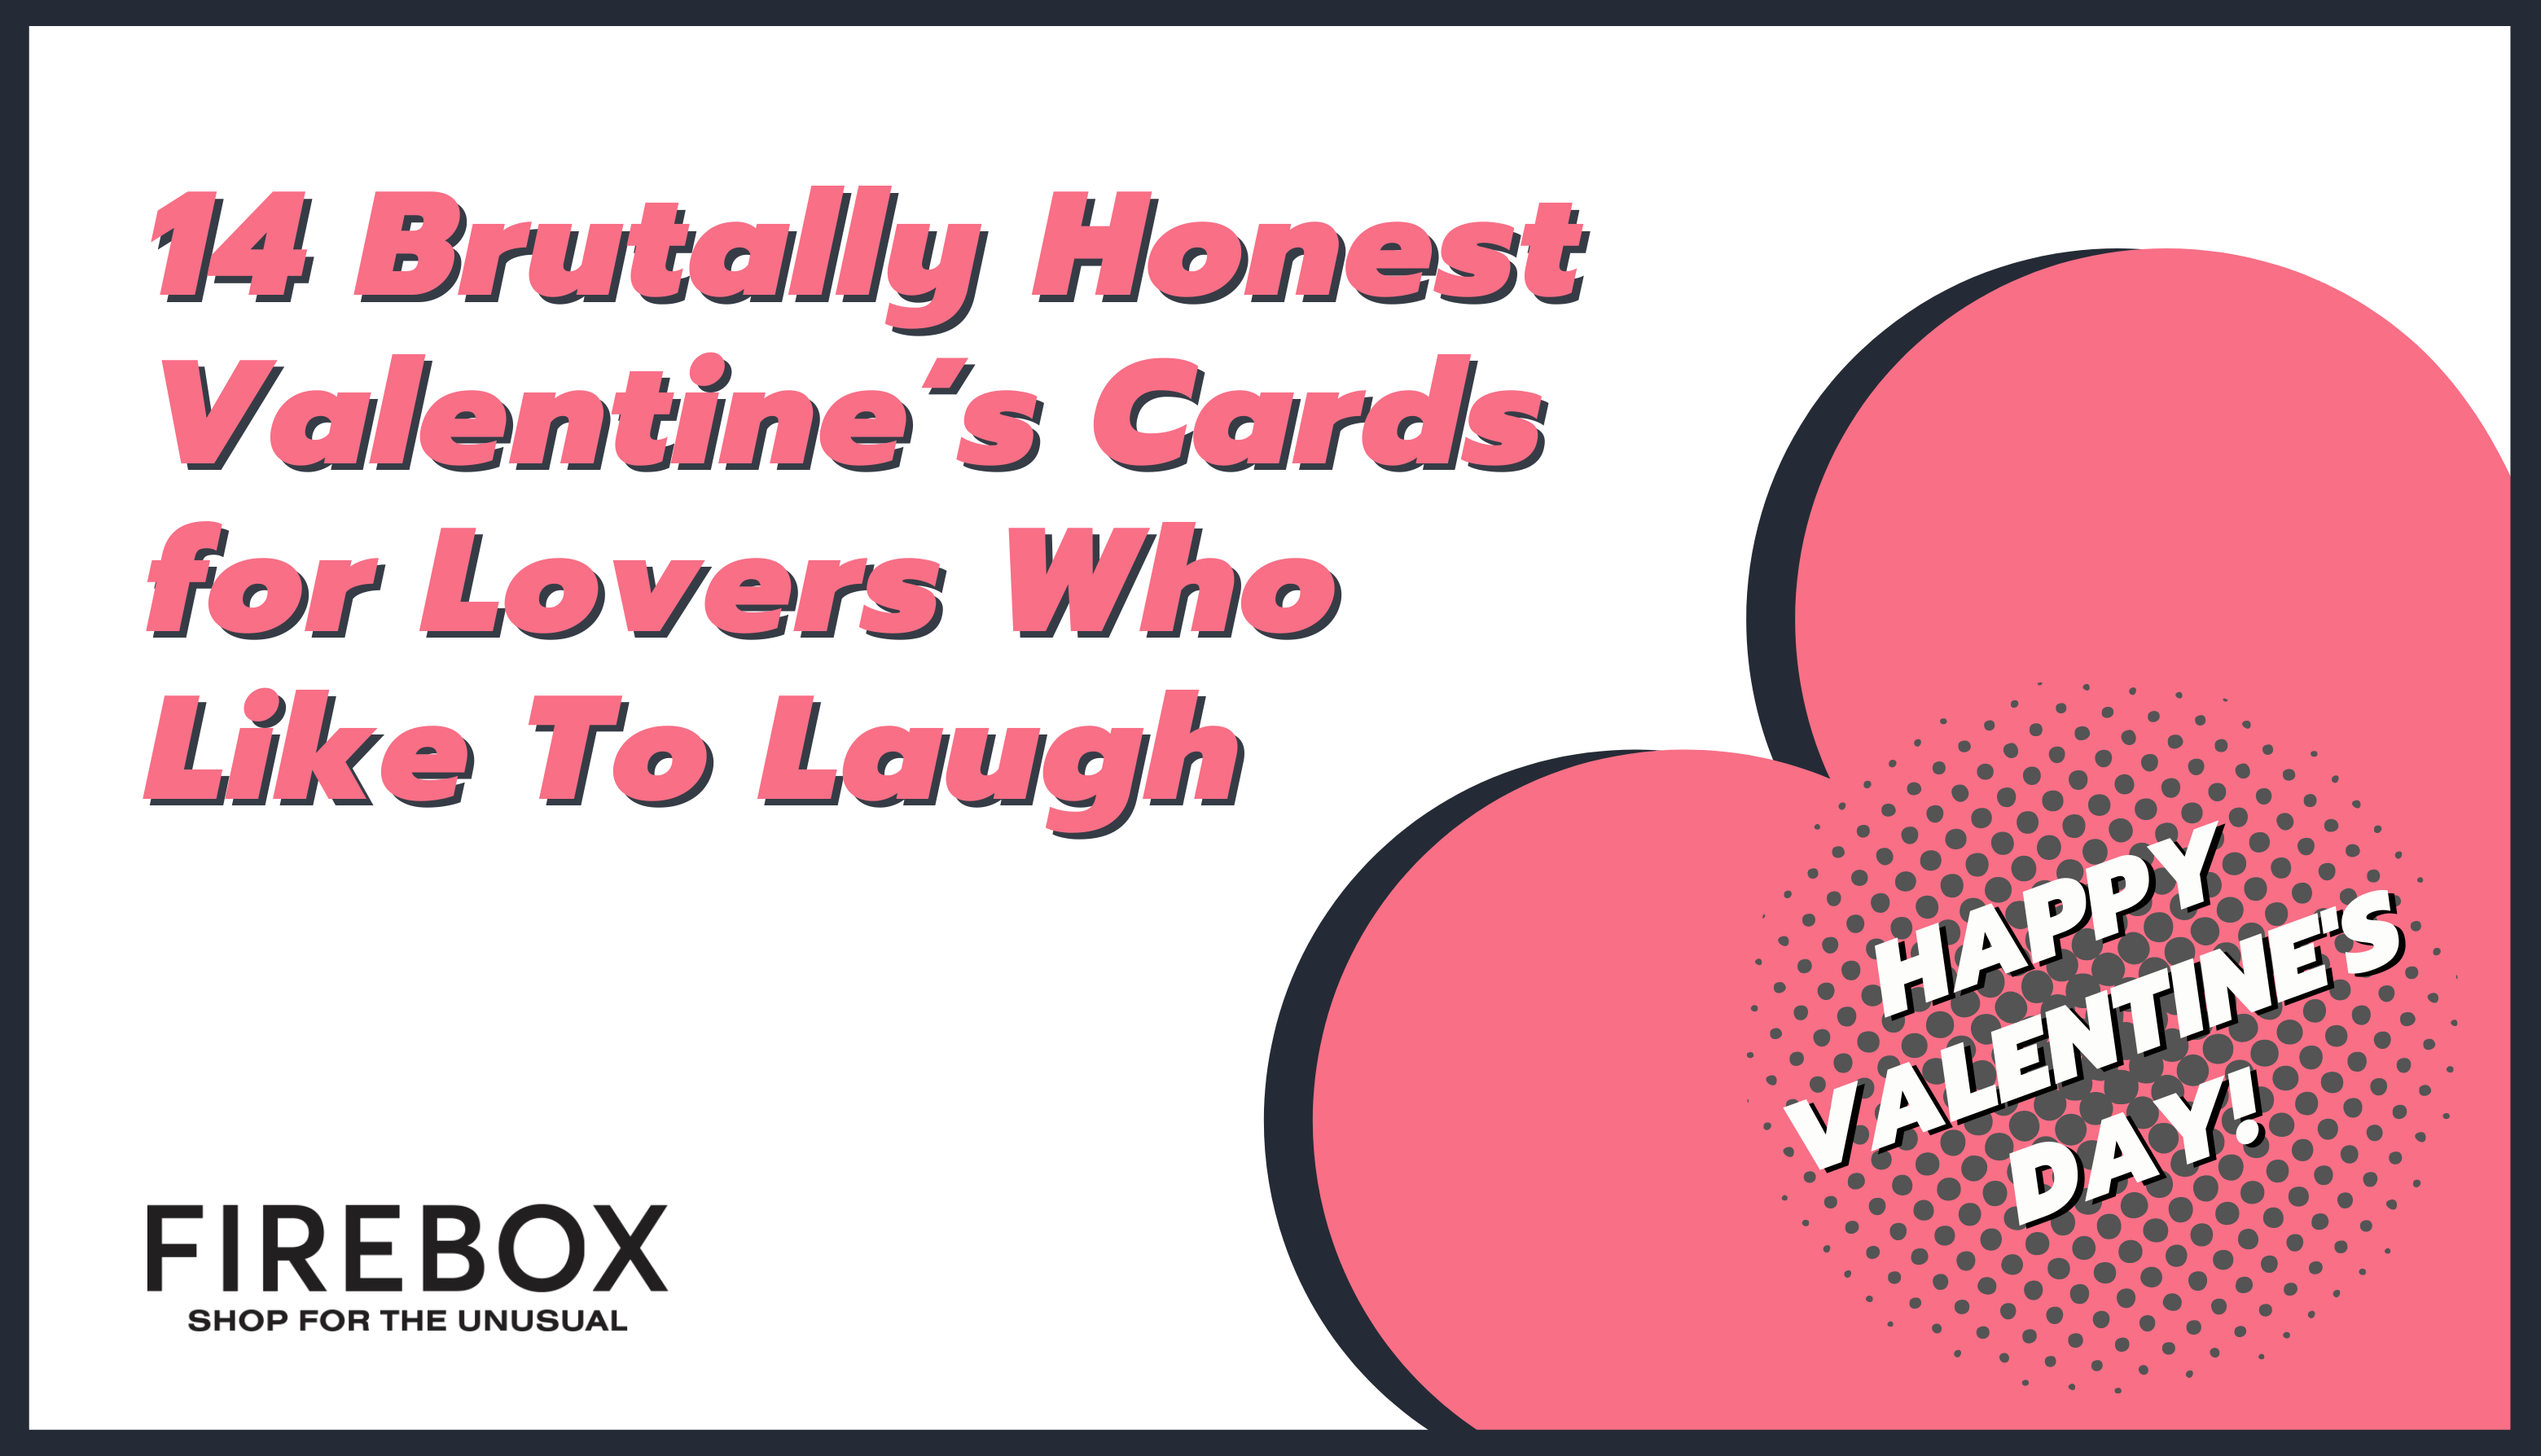 14 Honest Valentine's Cards for Lovers Who Like To Laugh